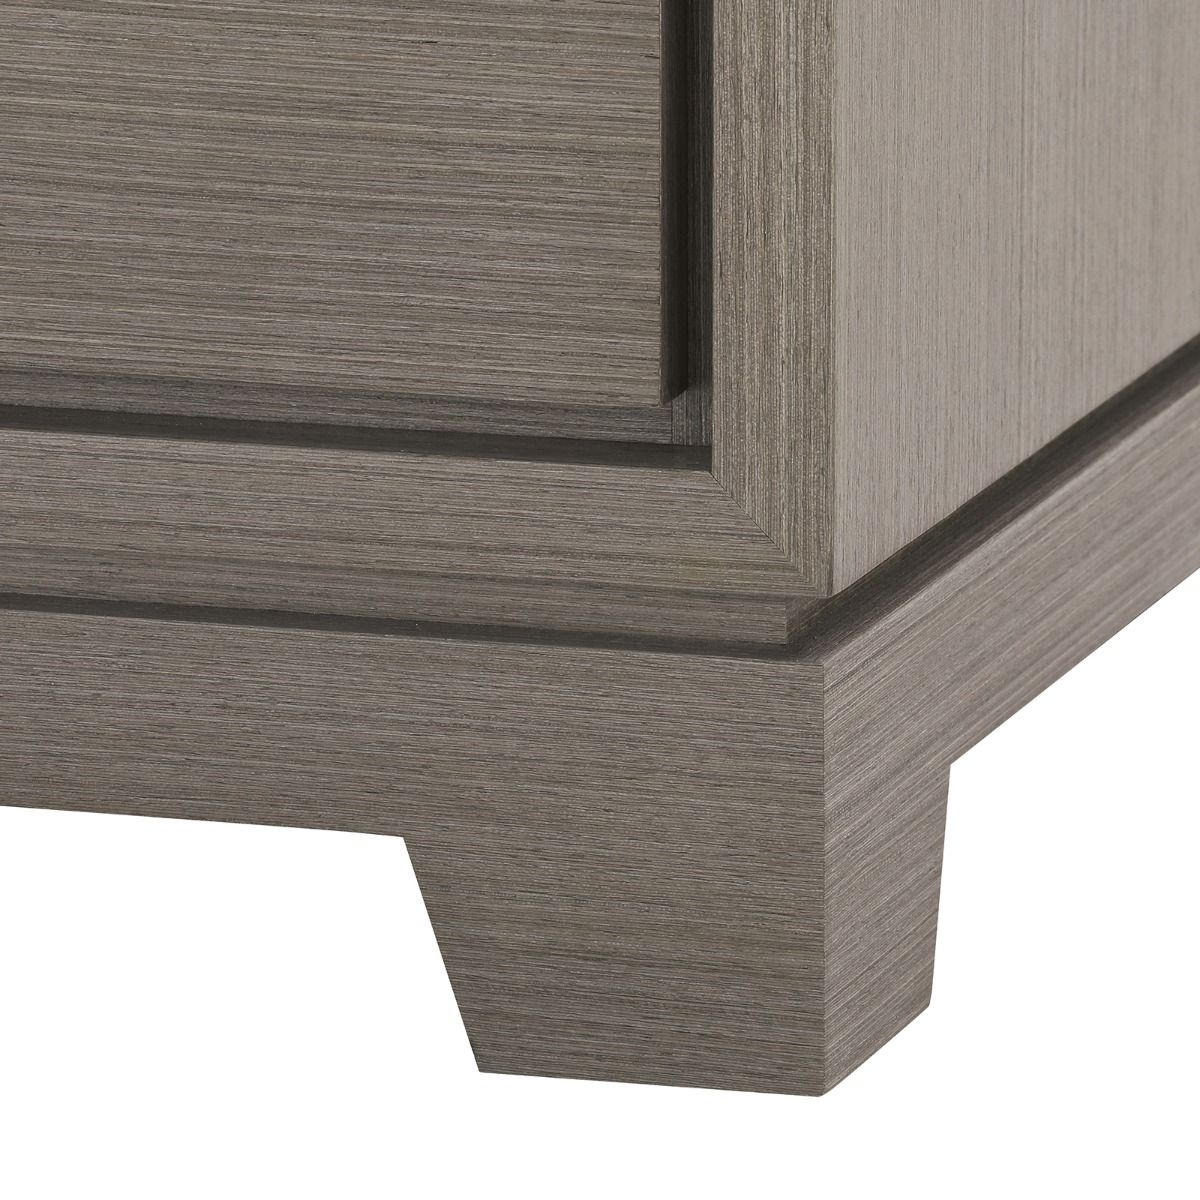 Harrison 3 Drawer Taupe Grey and Brass Nightstand